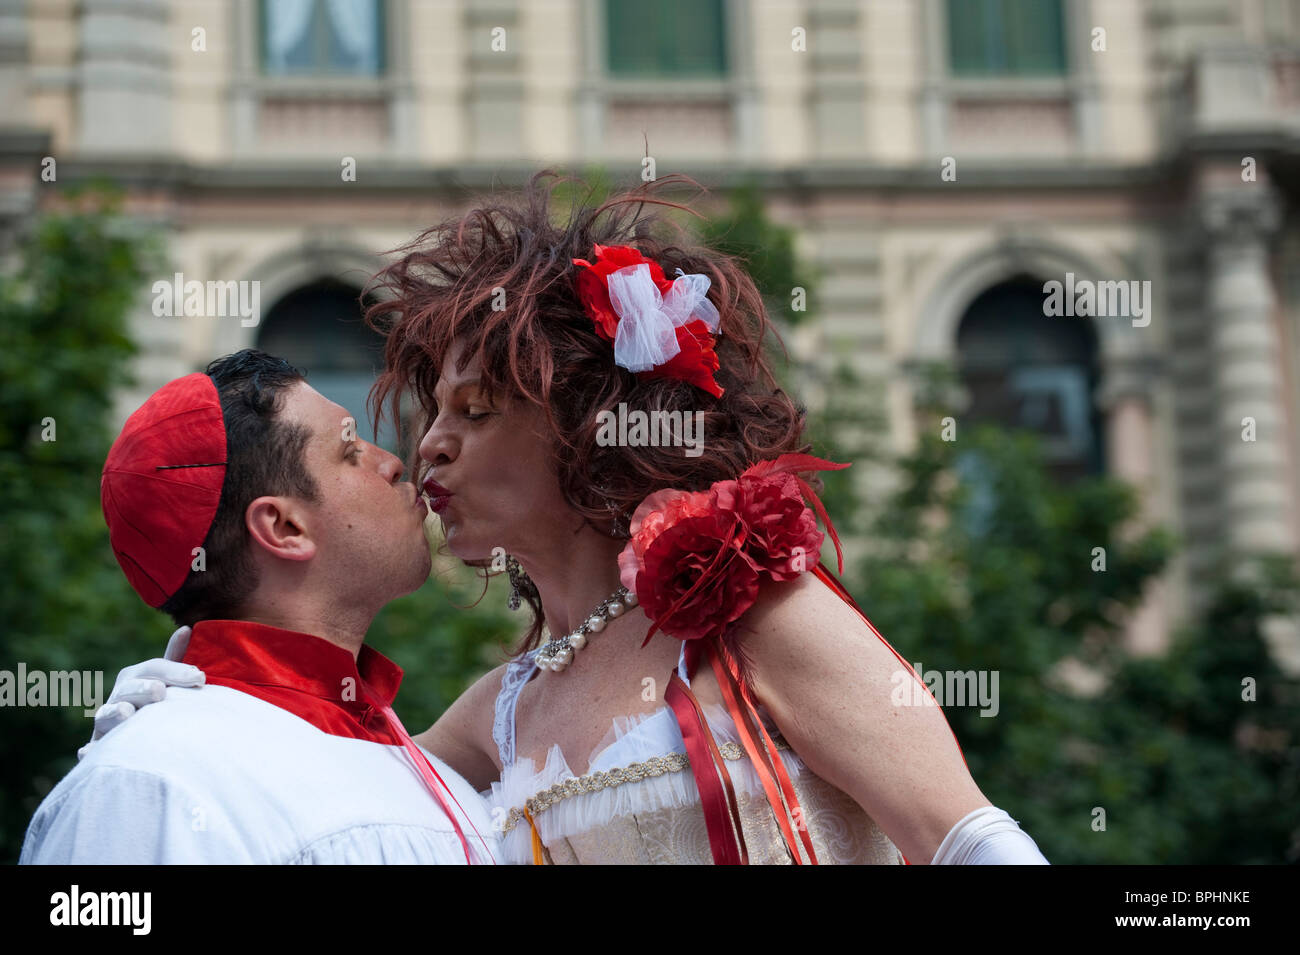 A man dressed as a priest and a man  in drag kissing at Gay Pride 2010 Milan Italy Stock Photo